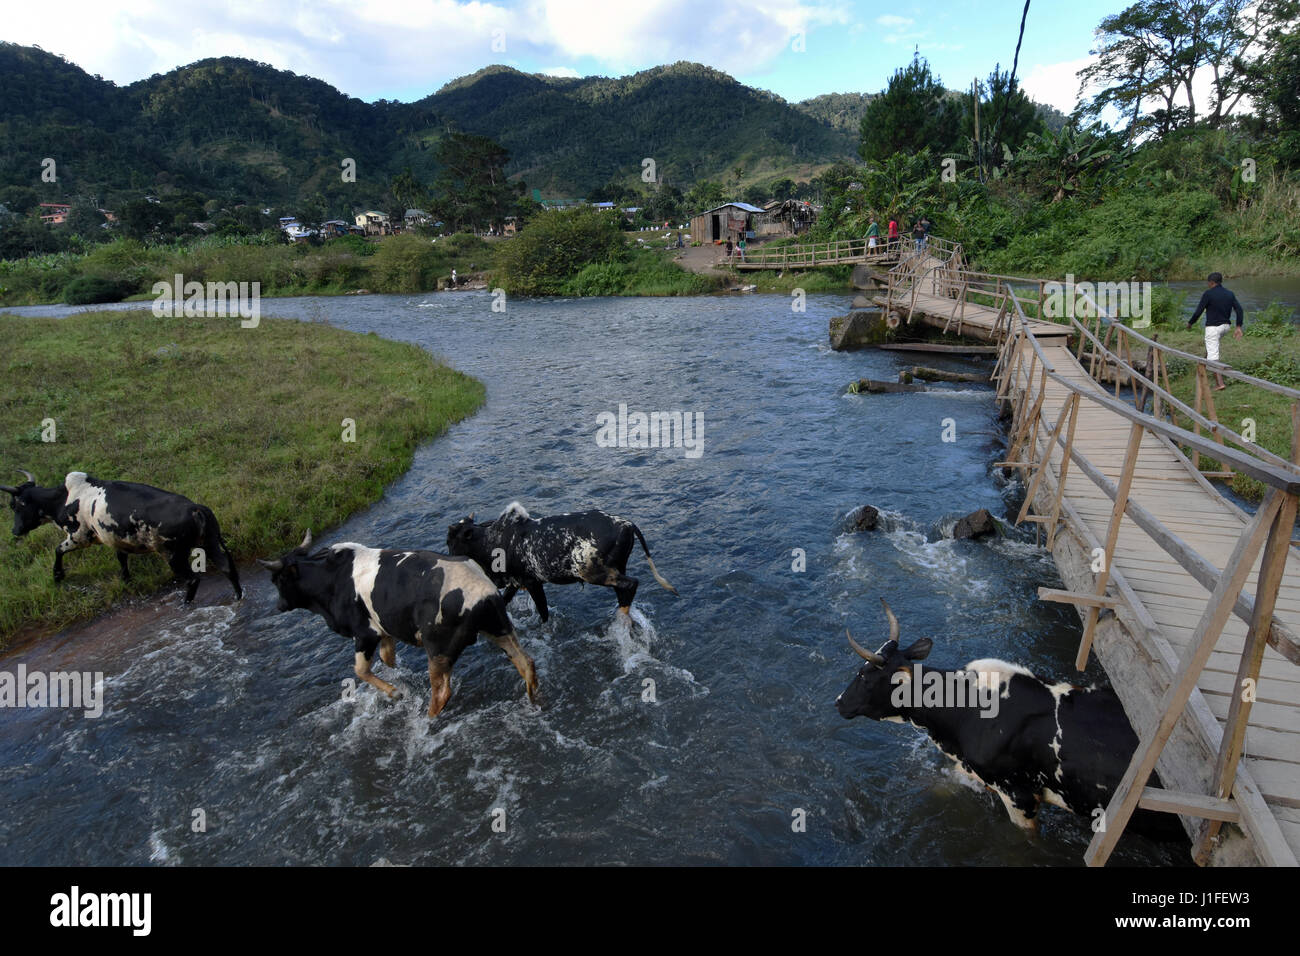 sacrificial animalCattle crossing the Namorona river in the town of Ranomafana in Madagascar Stock Photo